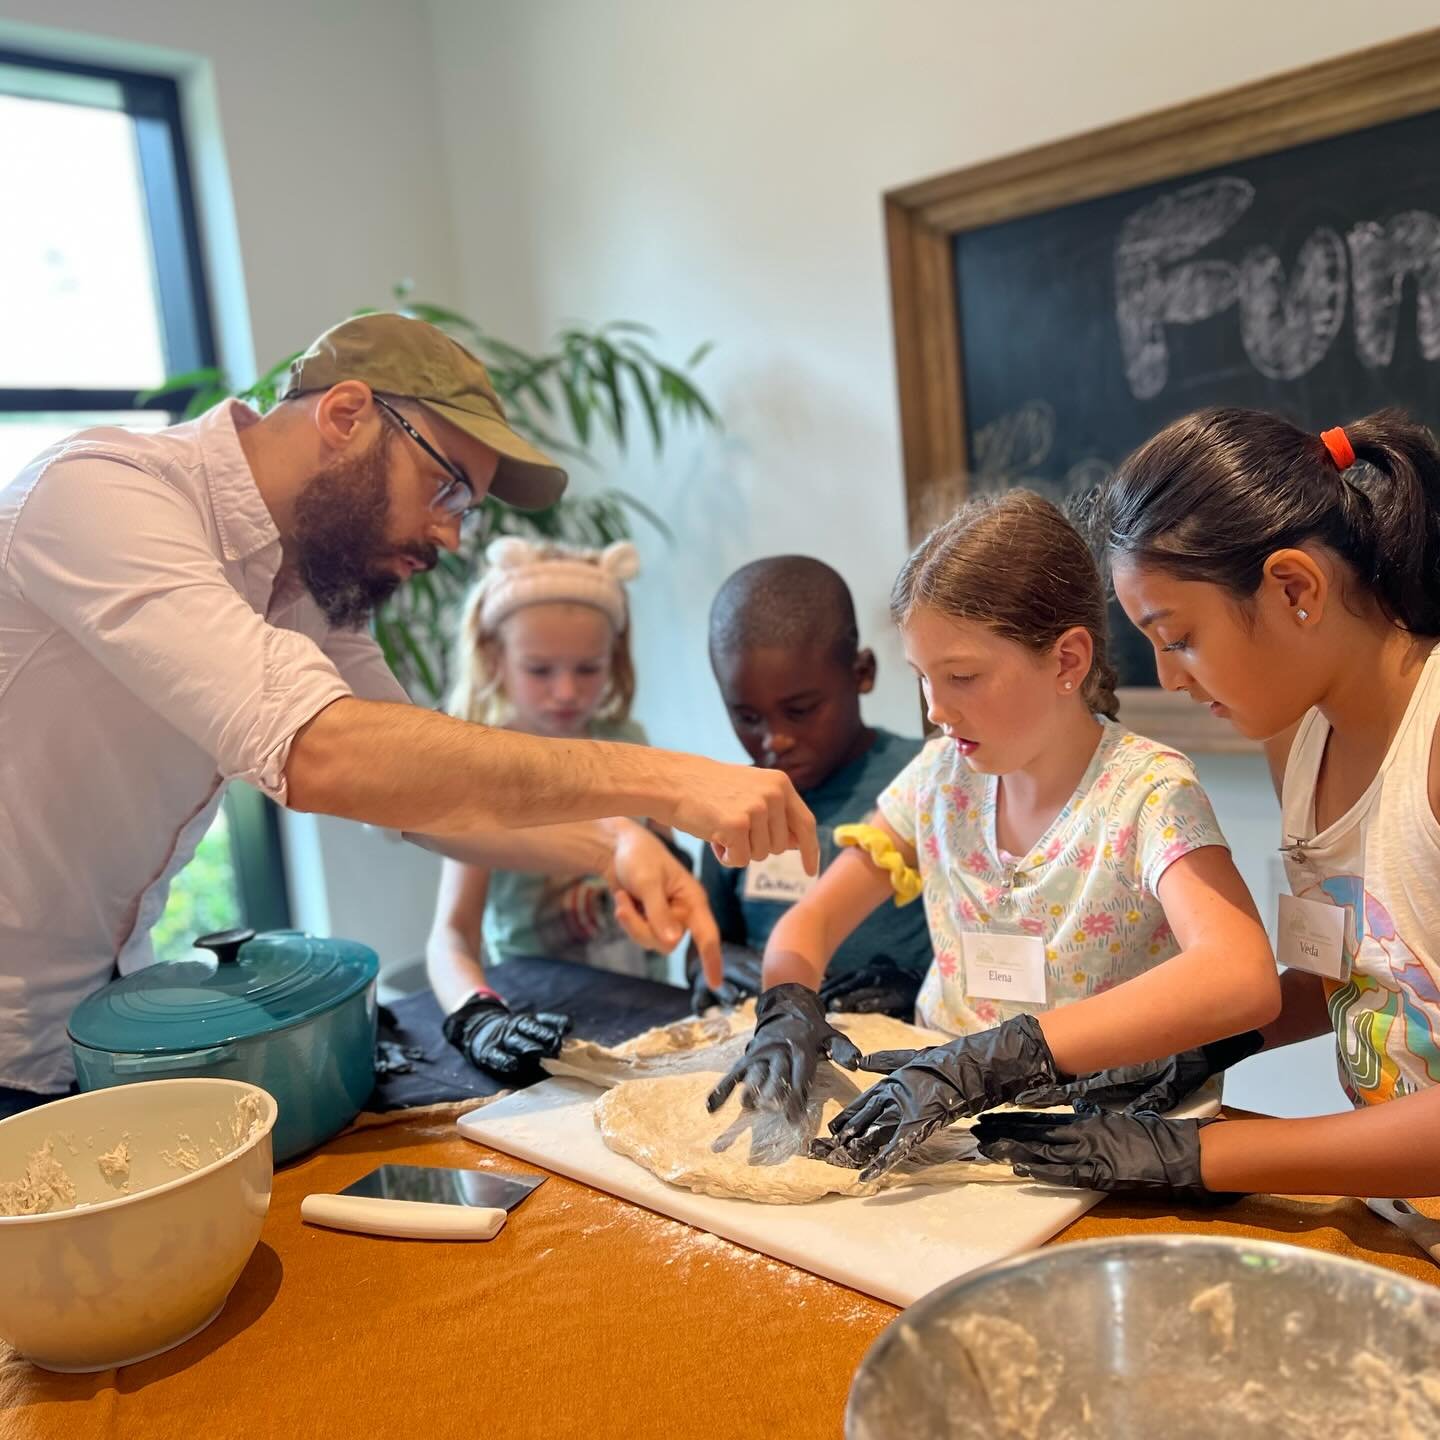 What&rsquo;s your teen up to this summer? They COULD be transforming the way they interact with food while learning to bake delicious plant based treats the whole family will enjoy. 
Just sayin&rsquo;. 😉🧑&zwj;🍳 

There are still spots open for our